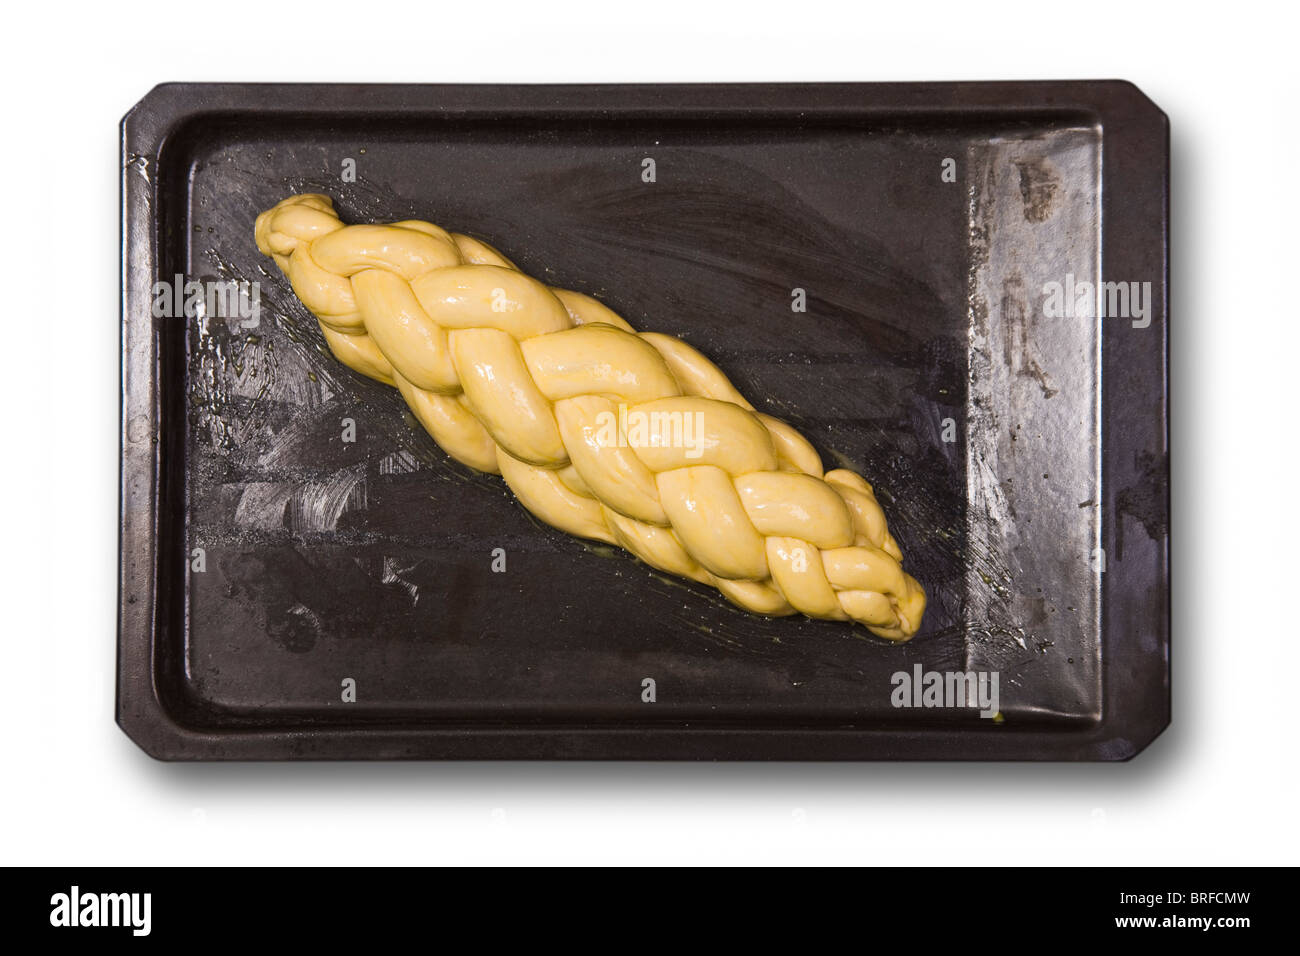 braid plaited loaf on a baking plate Stock Photo